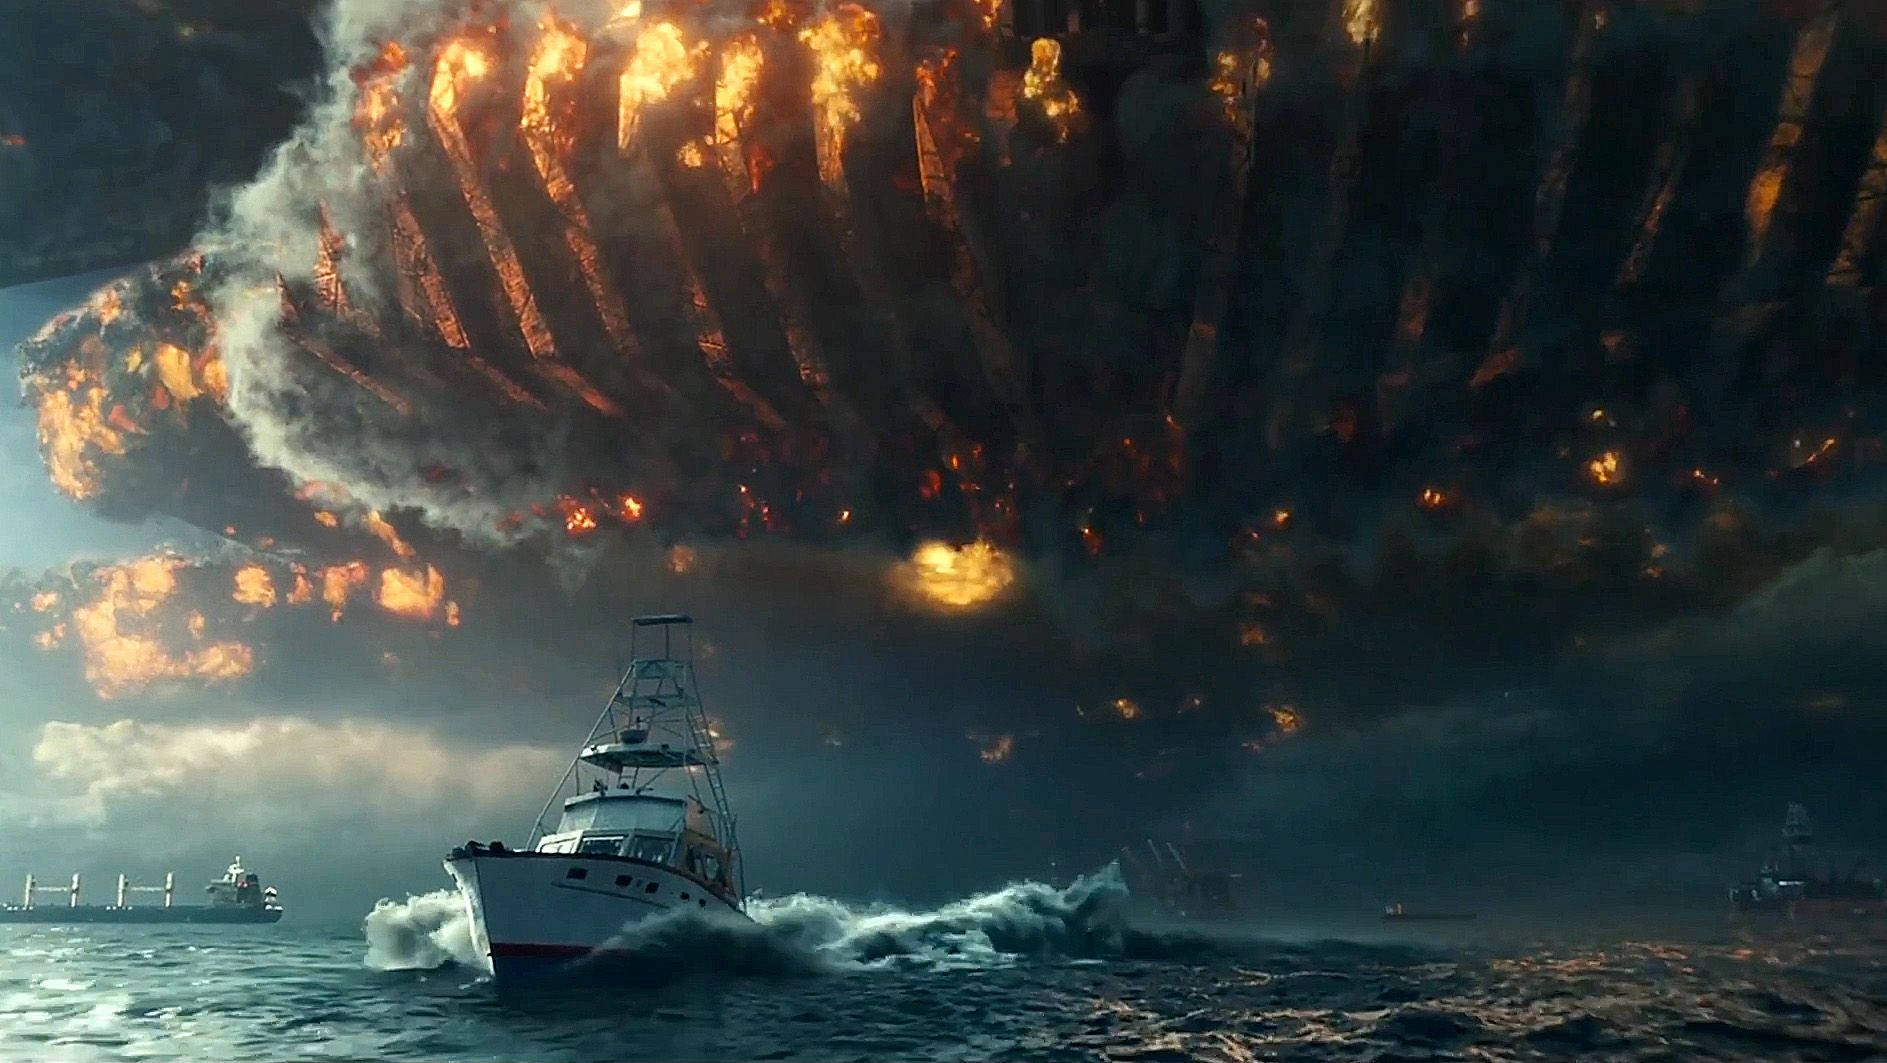 Will Smith and Jeff Goldblum Reunite In The Action-Packed 'Independence Day: Resurgence' Wallpaper